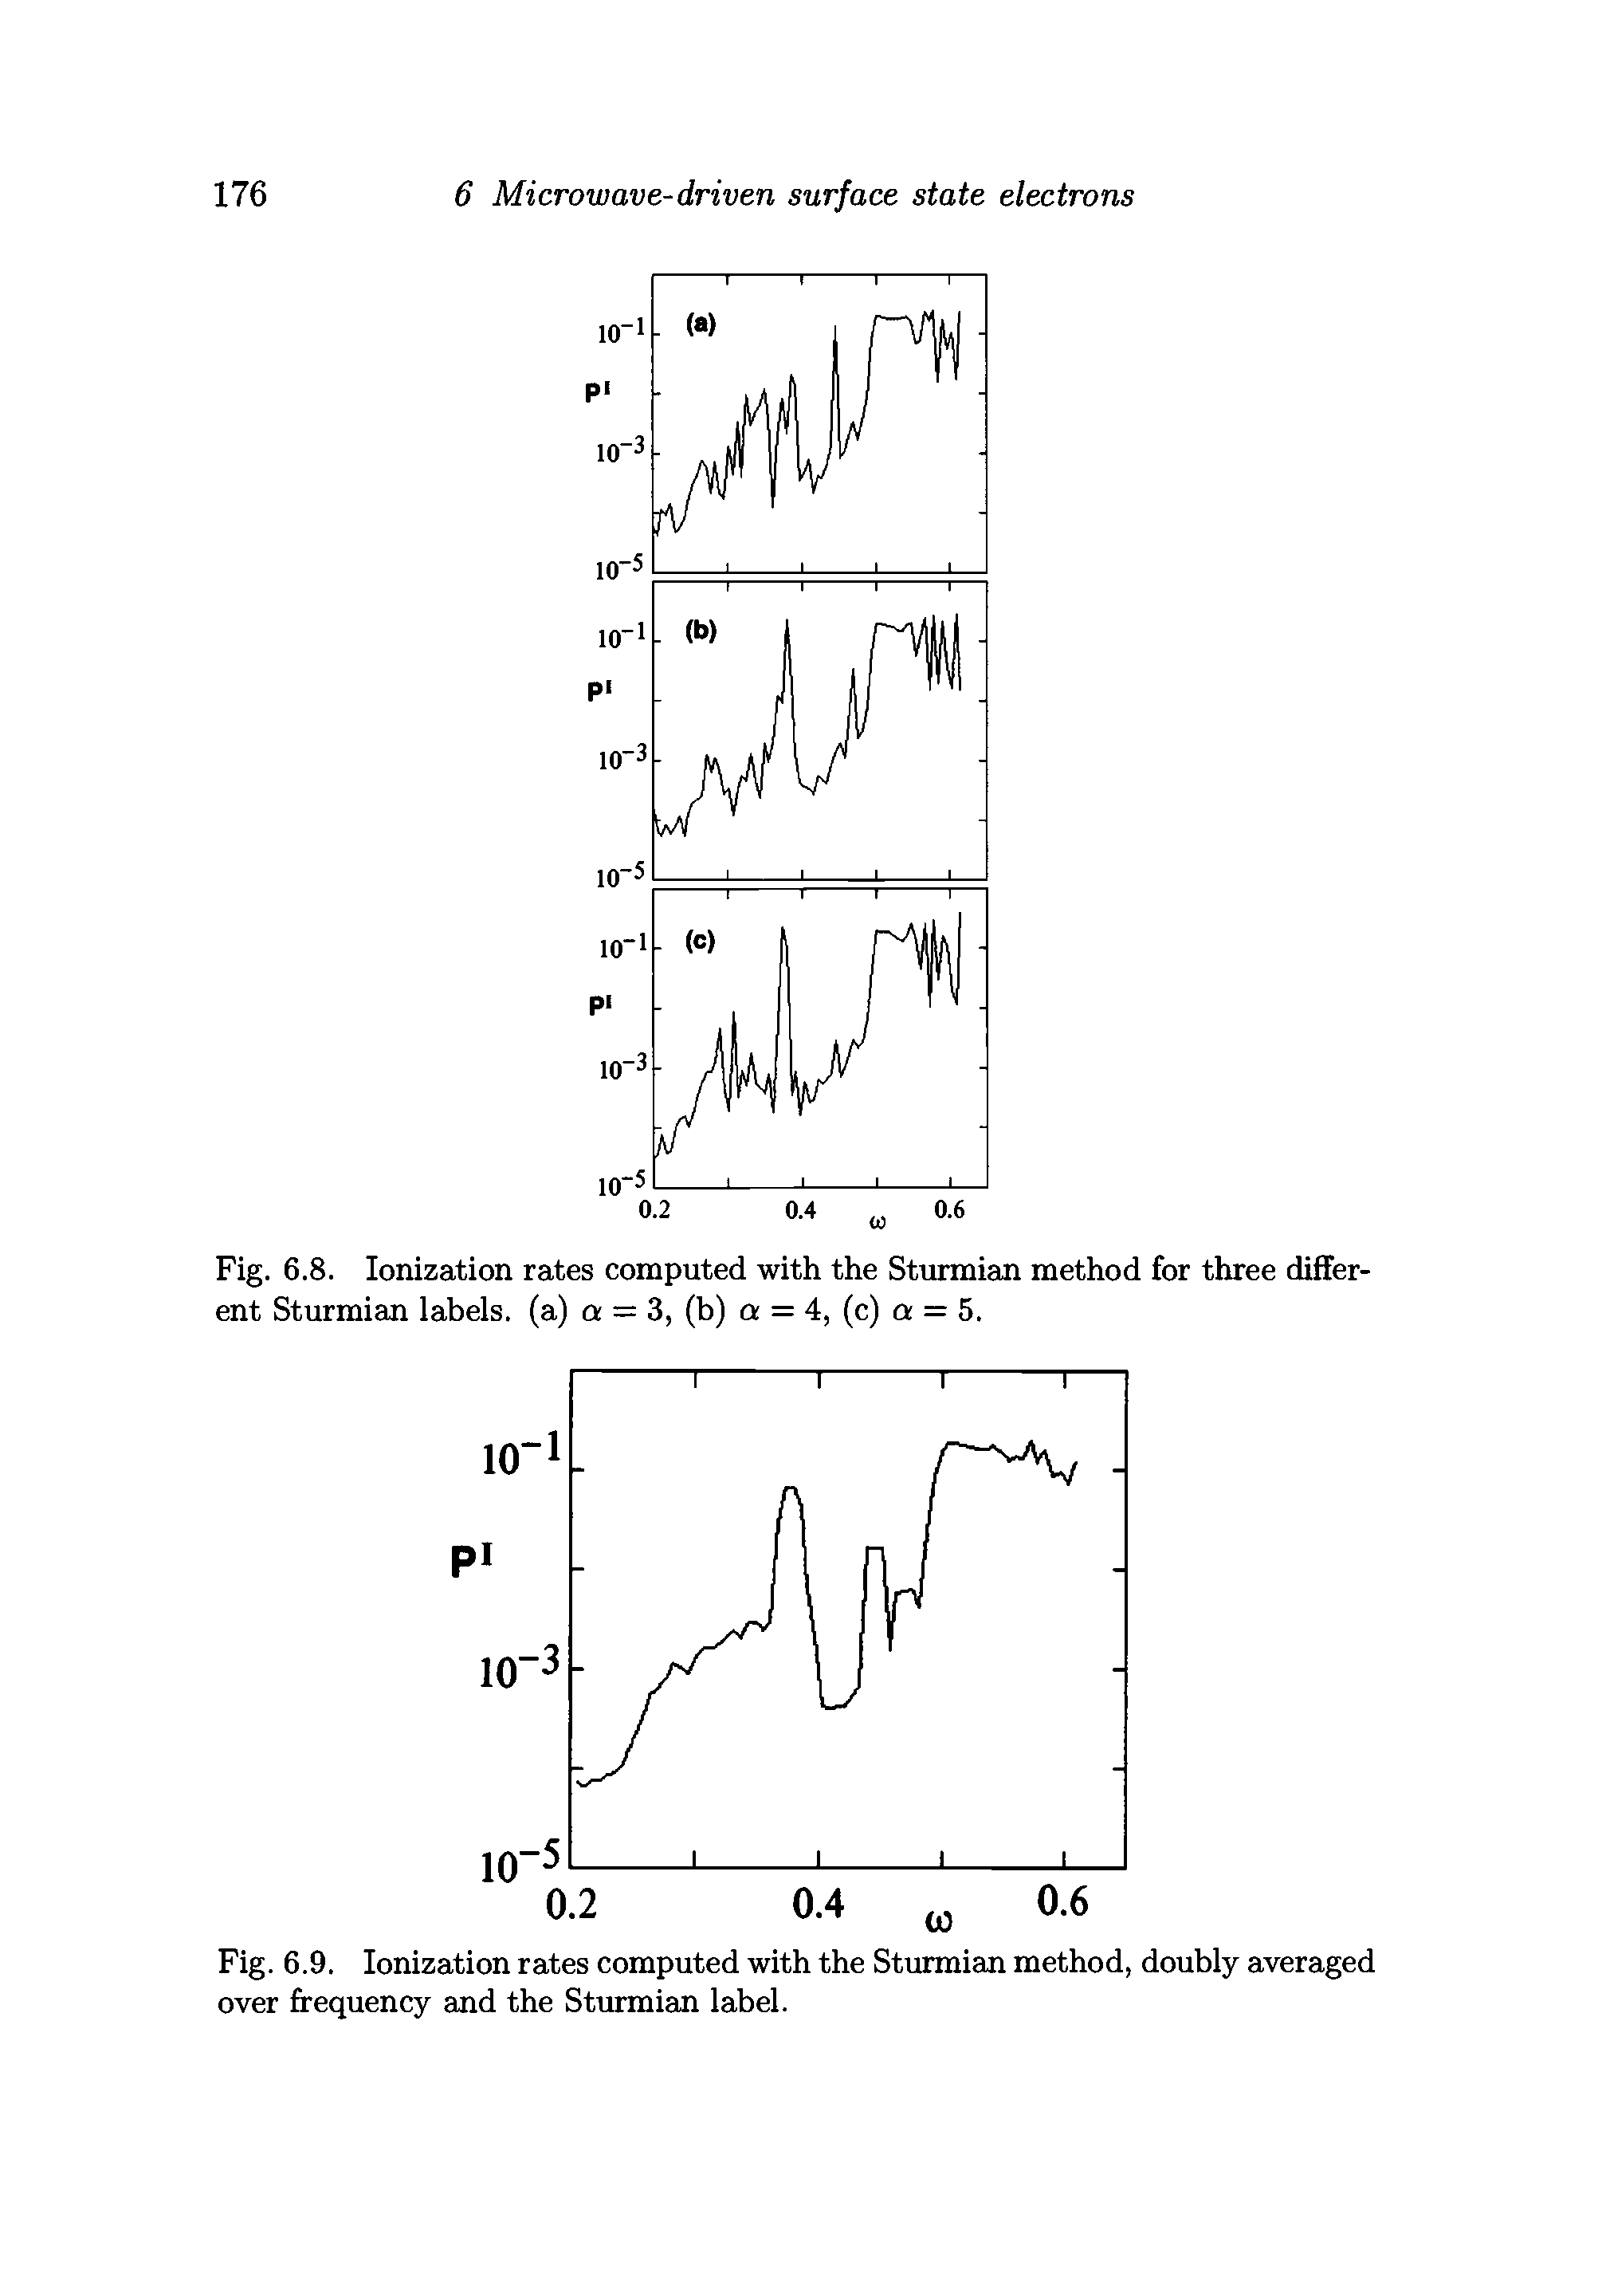 Fig. 6.8. Ionization rates computed with the Sturmian method for three different Sturmian labels, (a) a = 3, (b) a = 4, (c) a = 5.